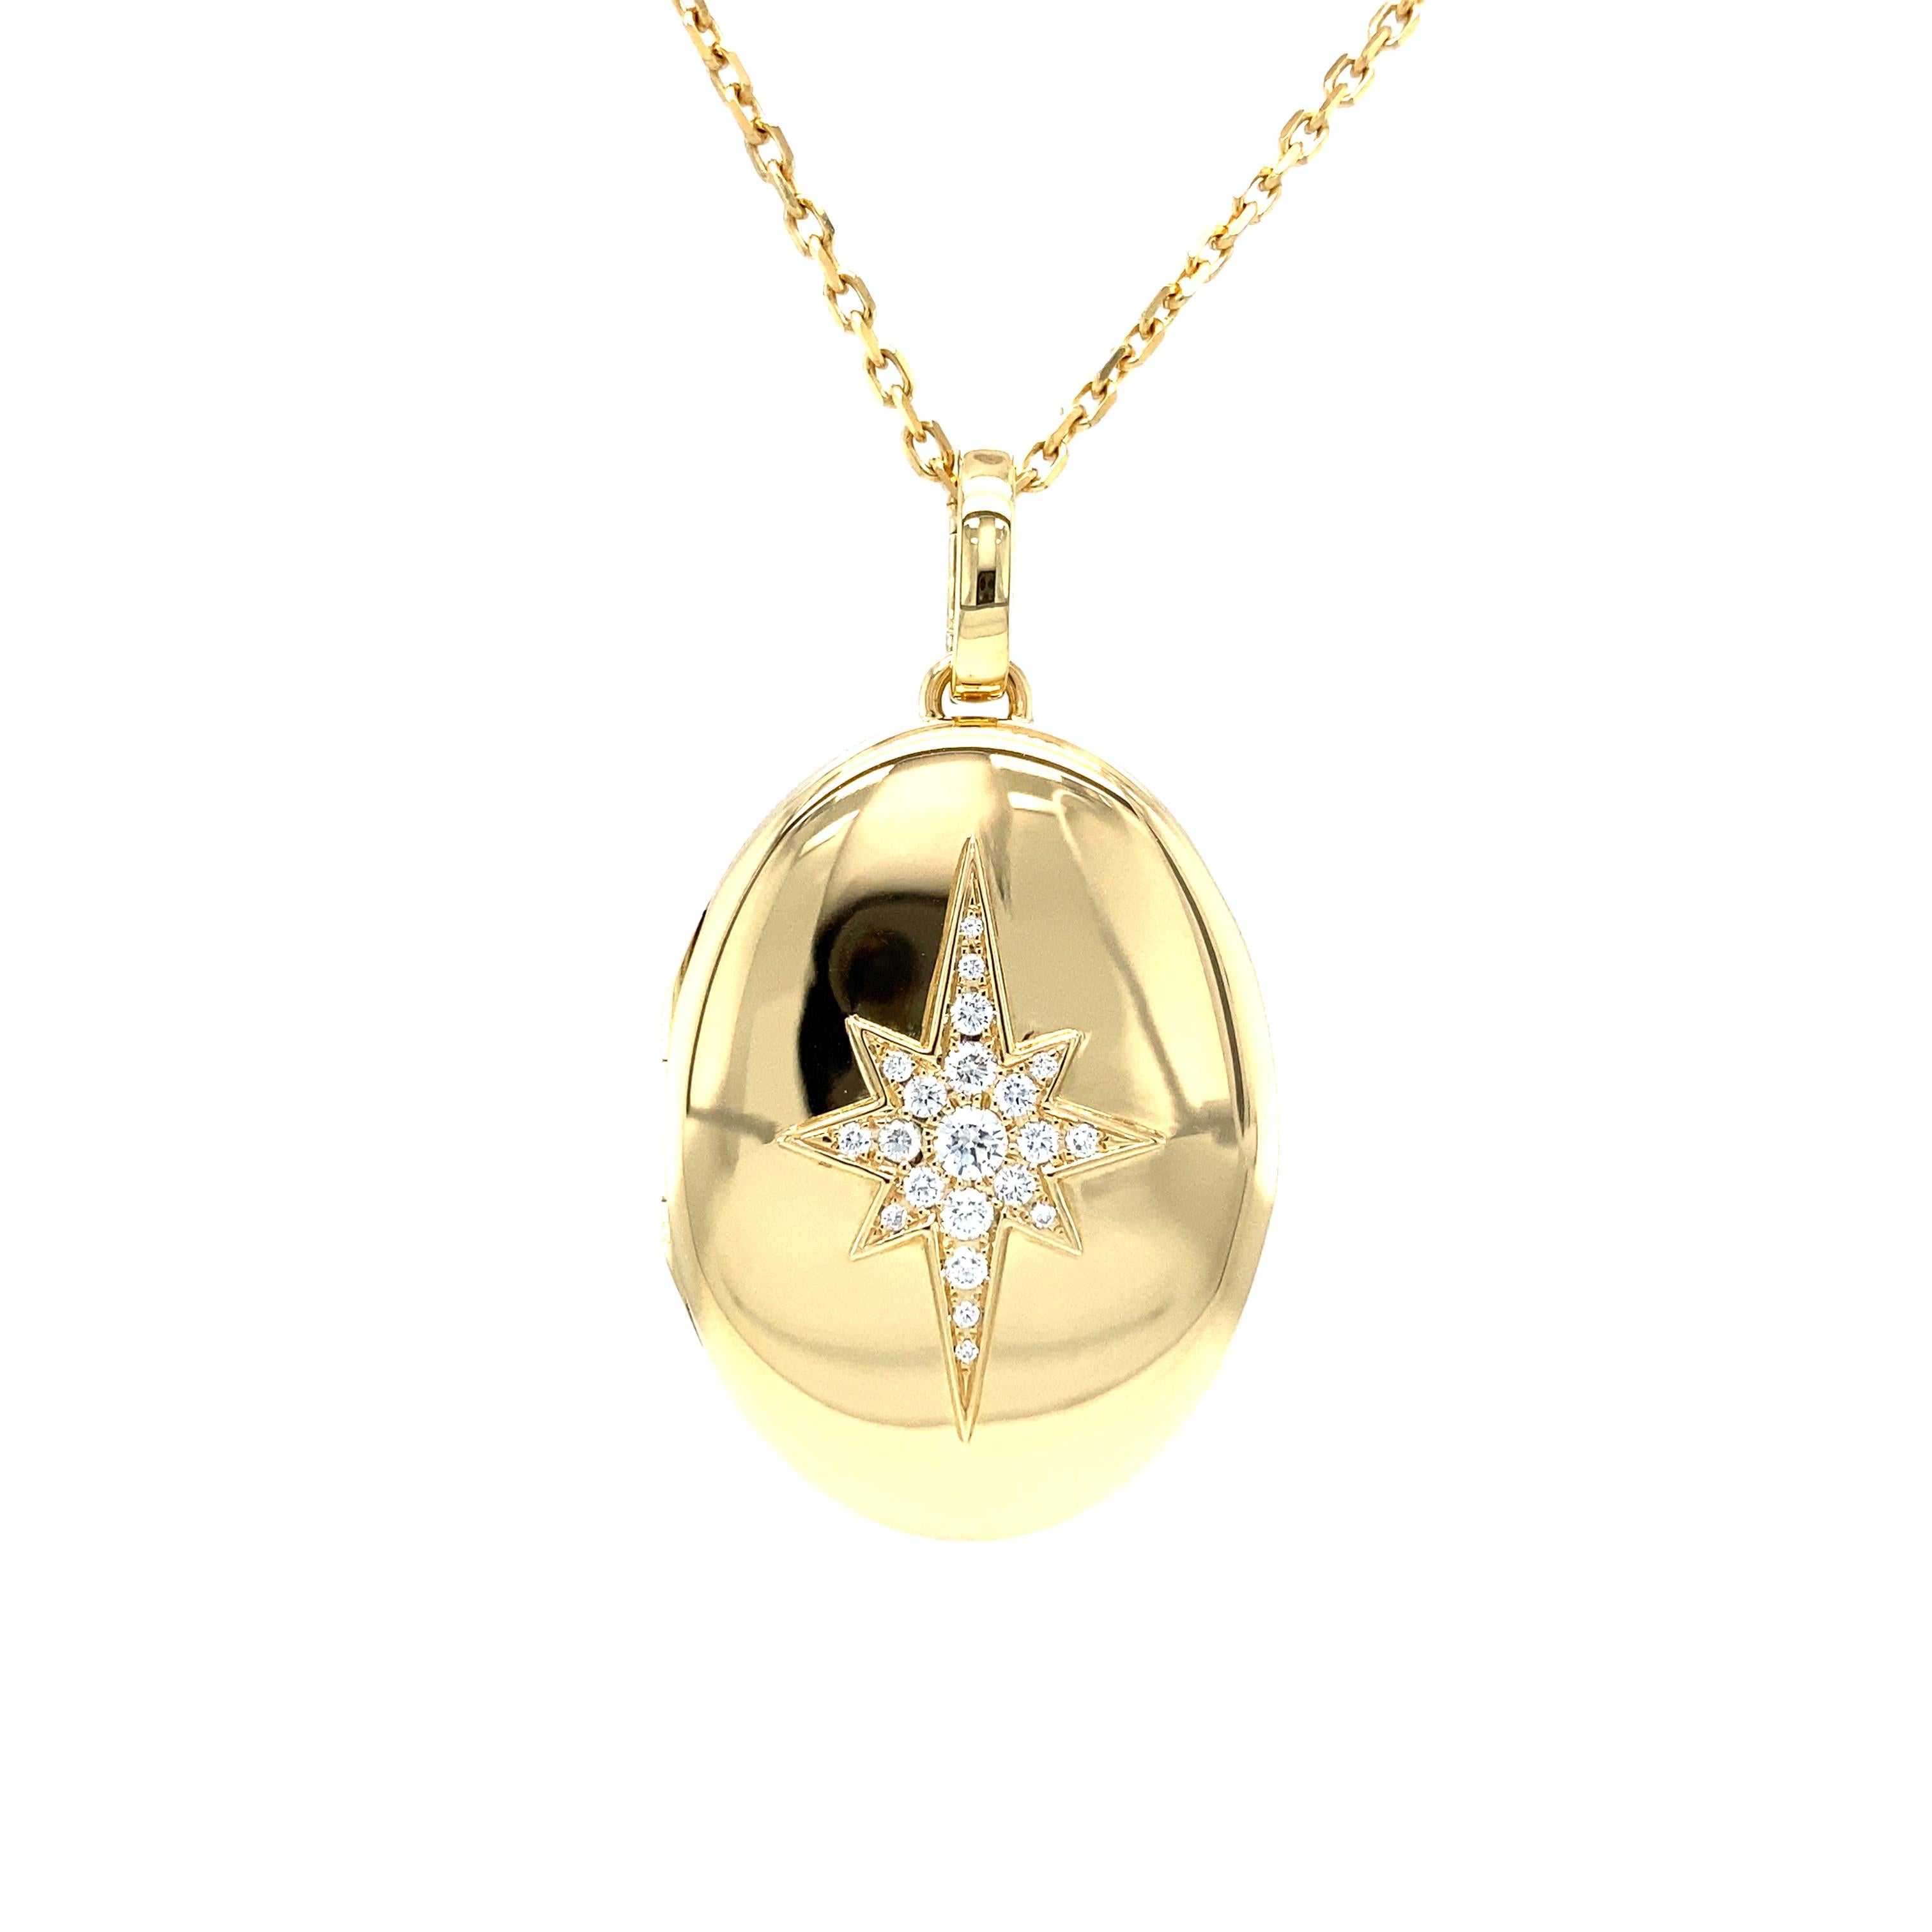 Victor Mayer customizable oval polished locket pendant necklace 18k yellow gold, Victoria Collection, 9 diamonds, total 0.14 ct, G VS, brilliant cut, measurements app. 35.2 mm x 25.8 mm

About the creator Victor Mayer
Victor Mayer is internationally